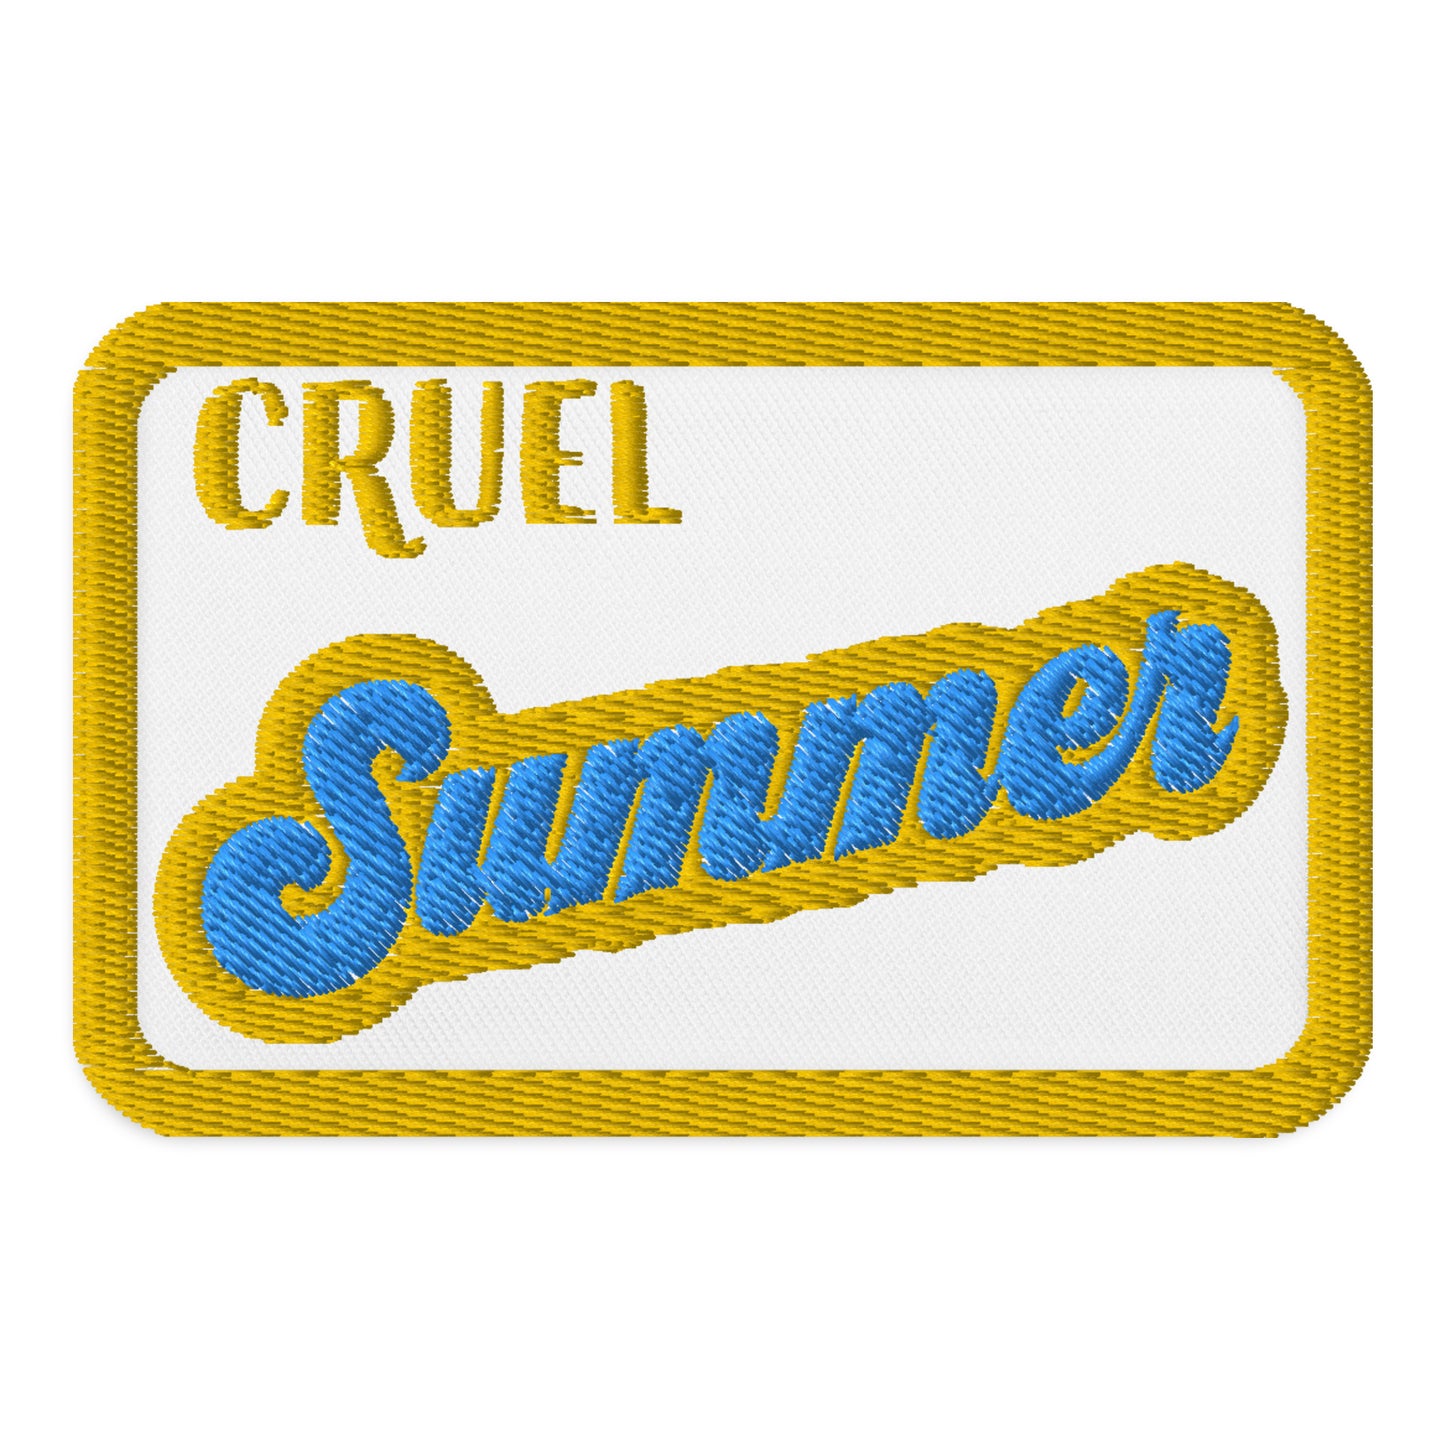 Actual Fan Made Merch: Cruel Summer Retro Embroidered patches